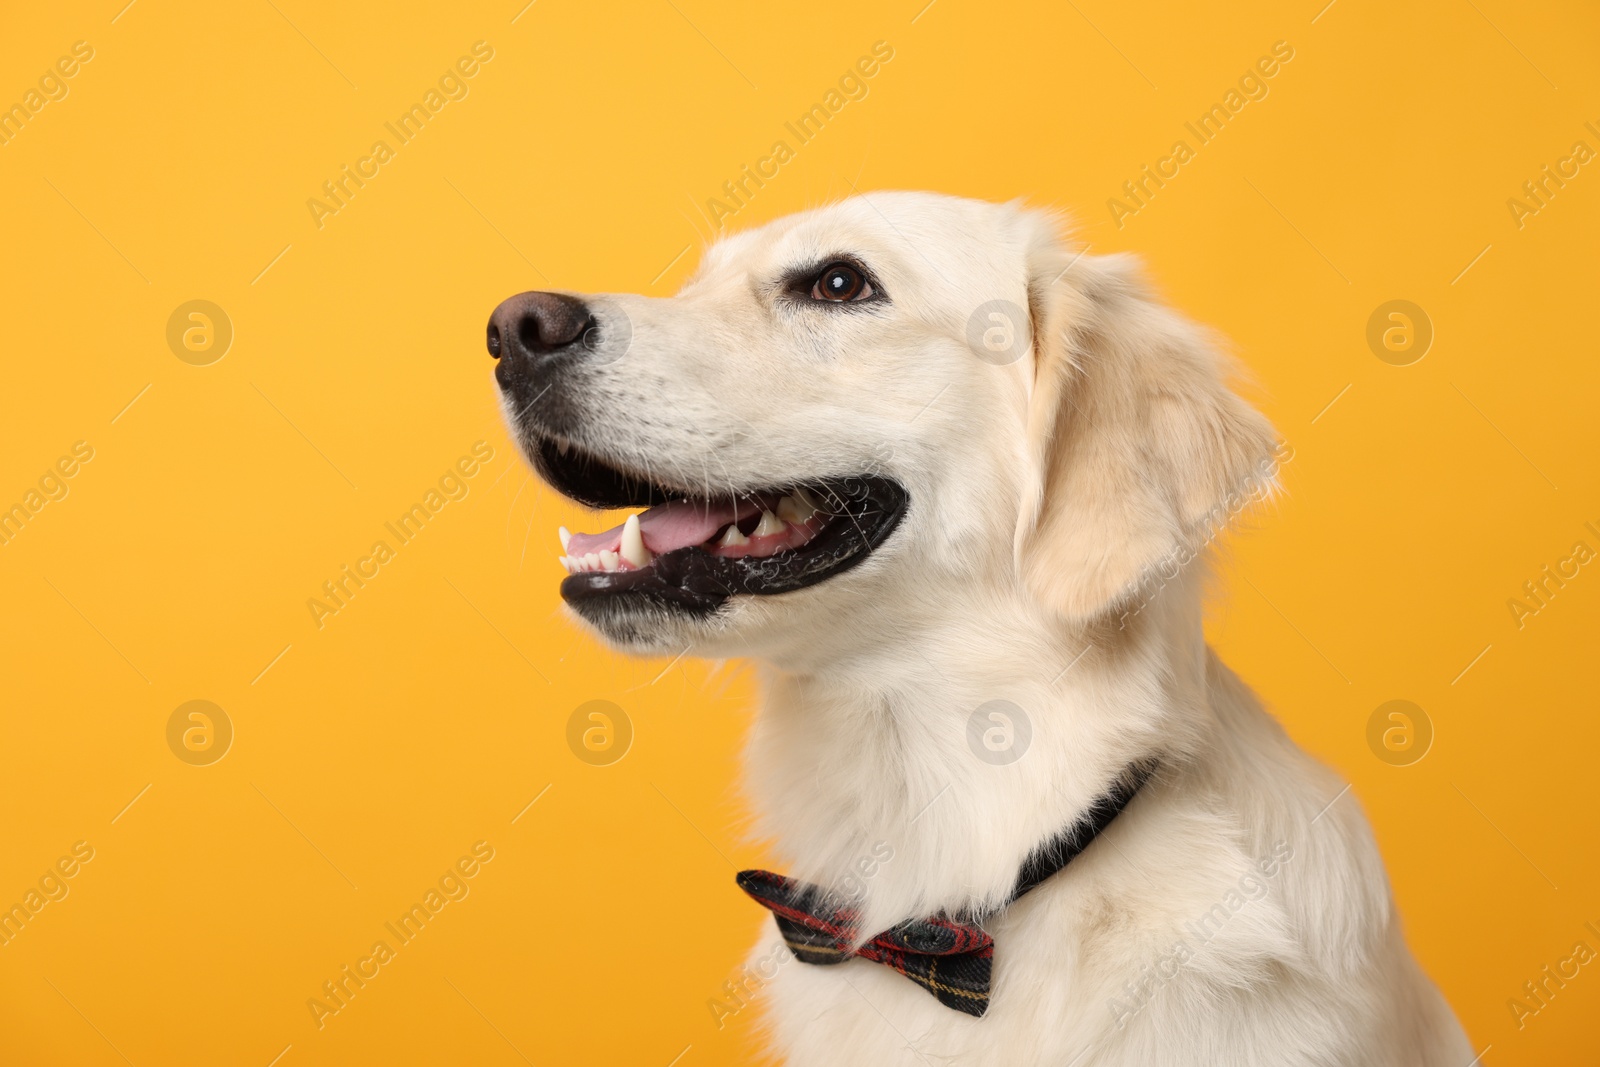 Photo of Cute Labrador Retriever dog with bow tie on yellow background